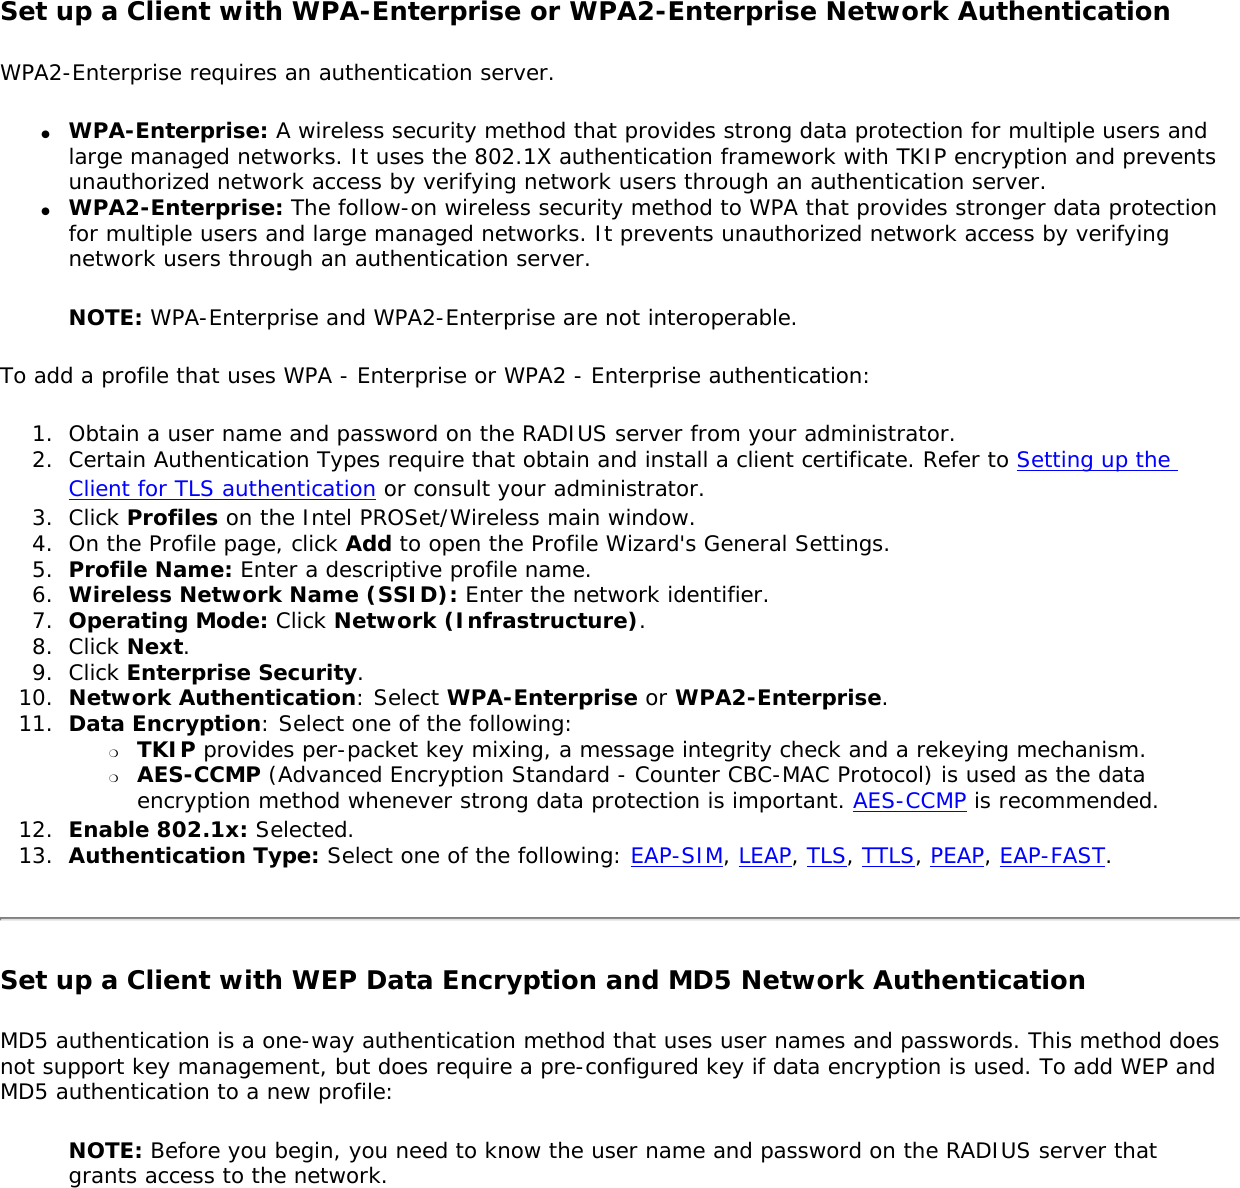 Set up a Client with WPA-Enterprise or WPA2-Enterprise Network AuthenticationWPA2-Enterprise requires an authentication server. ●     WPA-Enterprise: A wireless security method that provides strong data protection for multiple users and large managed networks. It uses the 802.1X authentication framework with TKIP encryption and prevents unauthorized network access by verifying network users through an authentication server. ●     WPA2-Enterprise: The follow-on wireless security method to WPA that provides stronger data protection for multiple users and large managed networks. It prevents unauthorized network access by verifying network users through an authentication server. NOTE: WPA-Enterprise and WPA2-Enterprise are not interoperable. To add a profile that uses WPA - Enterprise or WPA2 - Enterprise authentication: 1.  Obtain a user name and password on the RADIUS server from your administrator.2.  Certain Authentication Types require that obtain and install a client certificate. Refer to Setting up the Client for TLS authentication or consult your administrator. 3.  Click Profiles on the Intel PROSet/Wireless main window. 4.  On the Profile page, click Add to open the Profile Wizard&apos;s General Settings.5.  Profile Name: Enter a descriptive profile name.6.  Wireless Network Name (SSID): Enter the network identifier. 7.  Operating Mode: Click Network (Infrastructure). 8.  Click Next.9.  Click Enterprise Security.10.  Network Authentication: Select WPA-Enterprise or WPA2-Enterprise. 11.  Data Encryption: Select one of the following: ❍     TKIP provides per-packet key mixing, a message integrity check and a rekeying mechanism.❍     AES-CCMP (Advanced Encryption Standard - Counter CBC-MAC Protocol) is used as the data encryption method whenever strong data protection is important. AES-CCMP is recommended.12.  Enable 802.1x: Selected.13.  Authentication Type: Select one of the following: EAP-SIM, LEAP, TLS, TTLS, PEAP, EAP-FAST.Set up a Client with WEP Data Encryption and MD5 Network Authentication MD5 authentication is a one-way authentication method that uses user names and passwords. This method does not support key management, but does require a pre-configured key if data encryption is used. To add WEP and MD5 authentication to a new profile: NOTE: Before you begin, you need to know the user name and password on the RADIUS server that grants access to the network. 